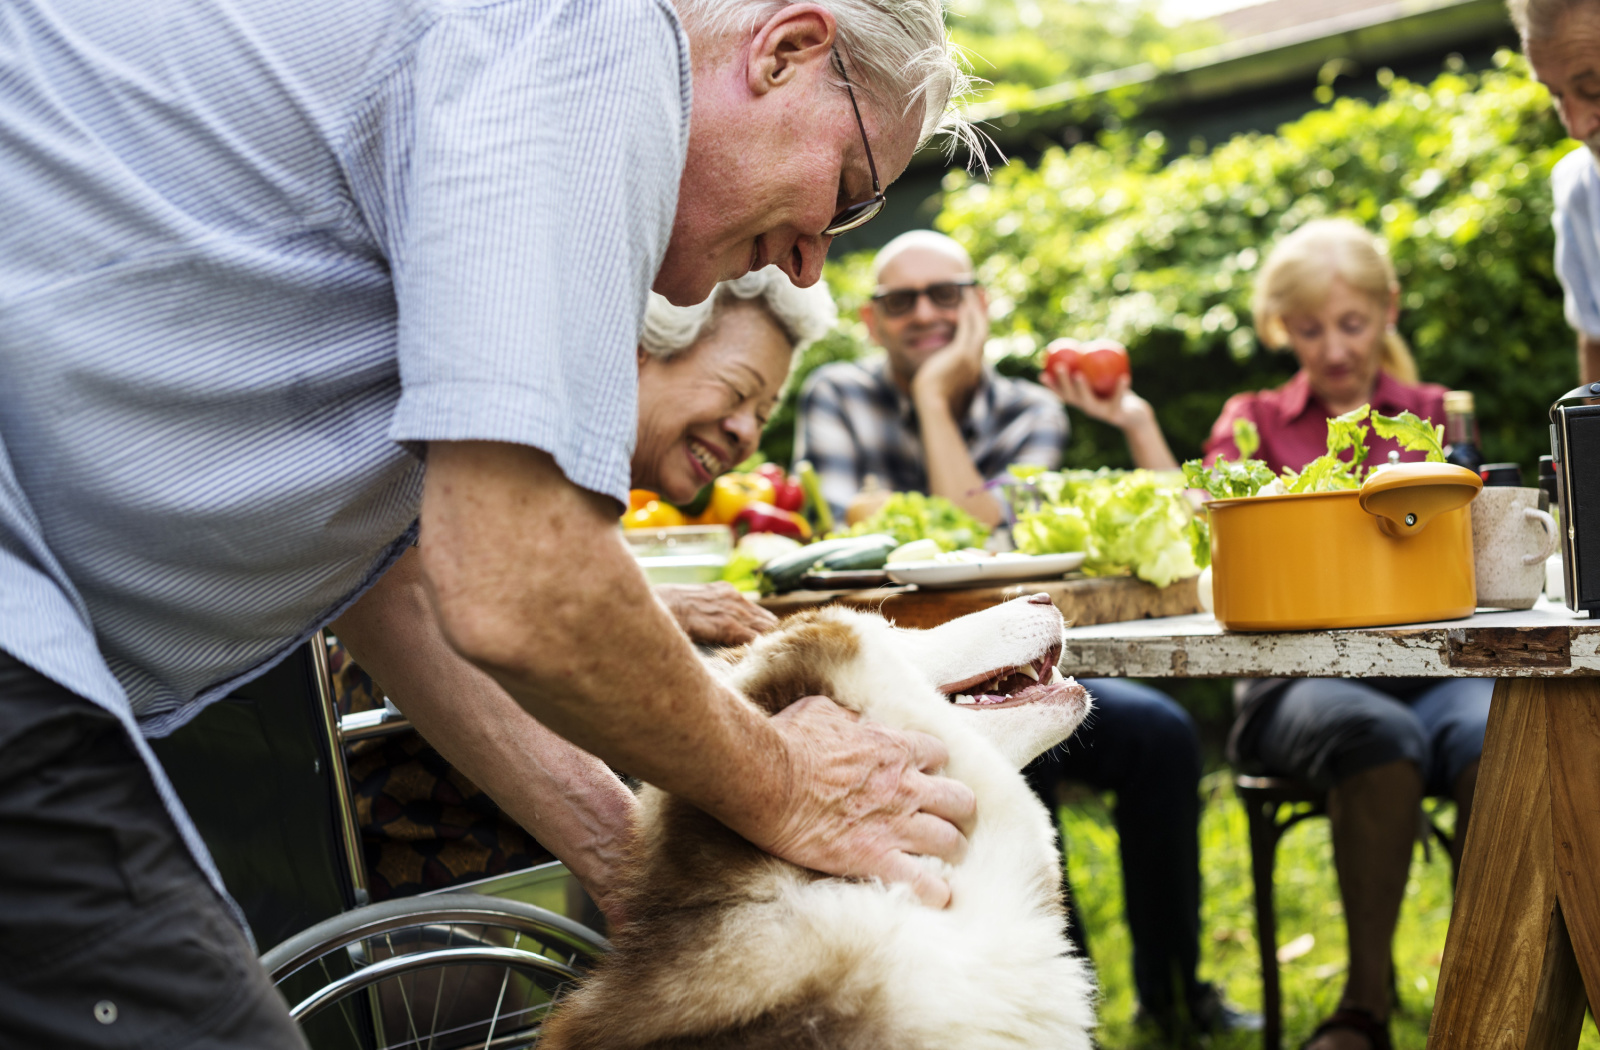 An older adult man playing with a dog at a park with other seniors eating.